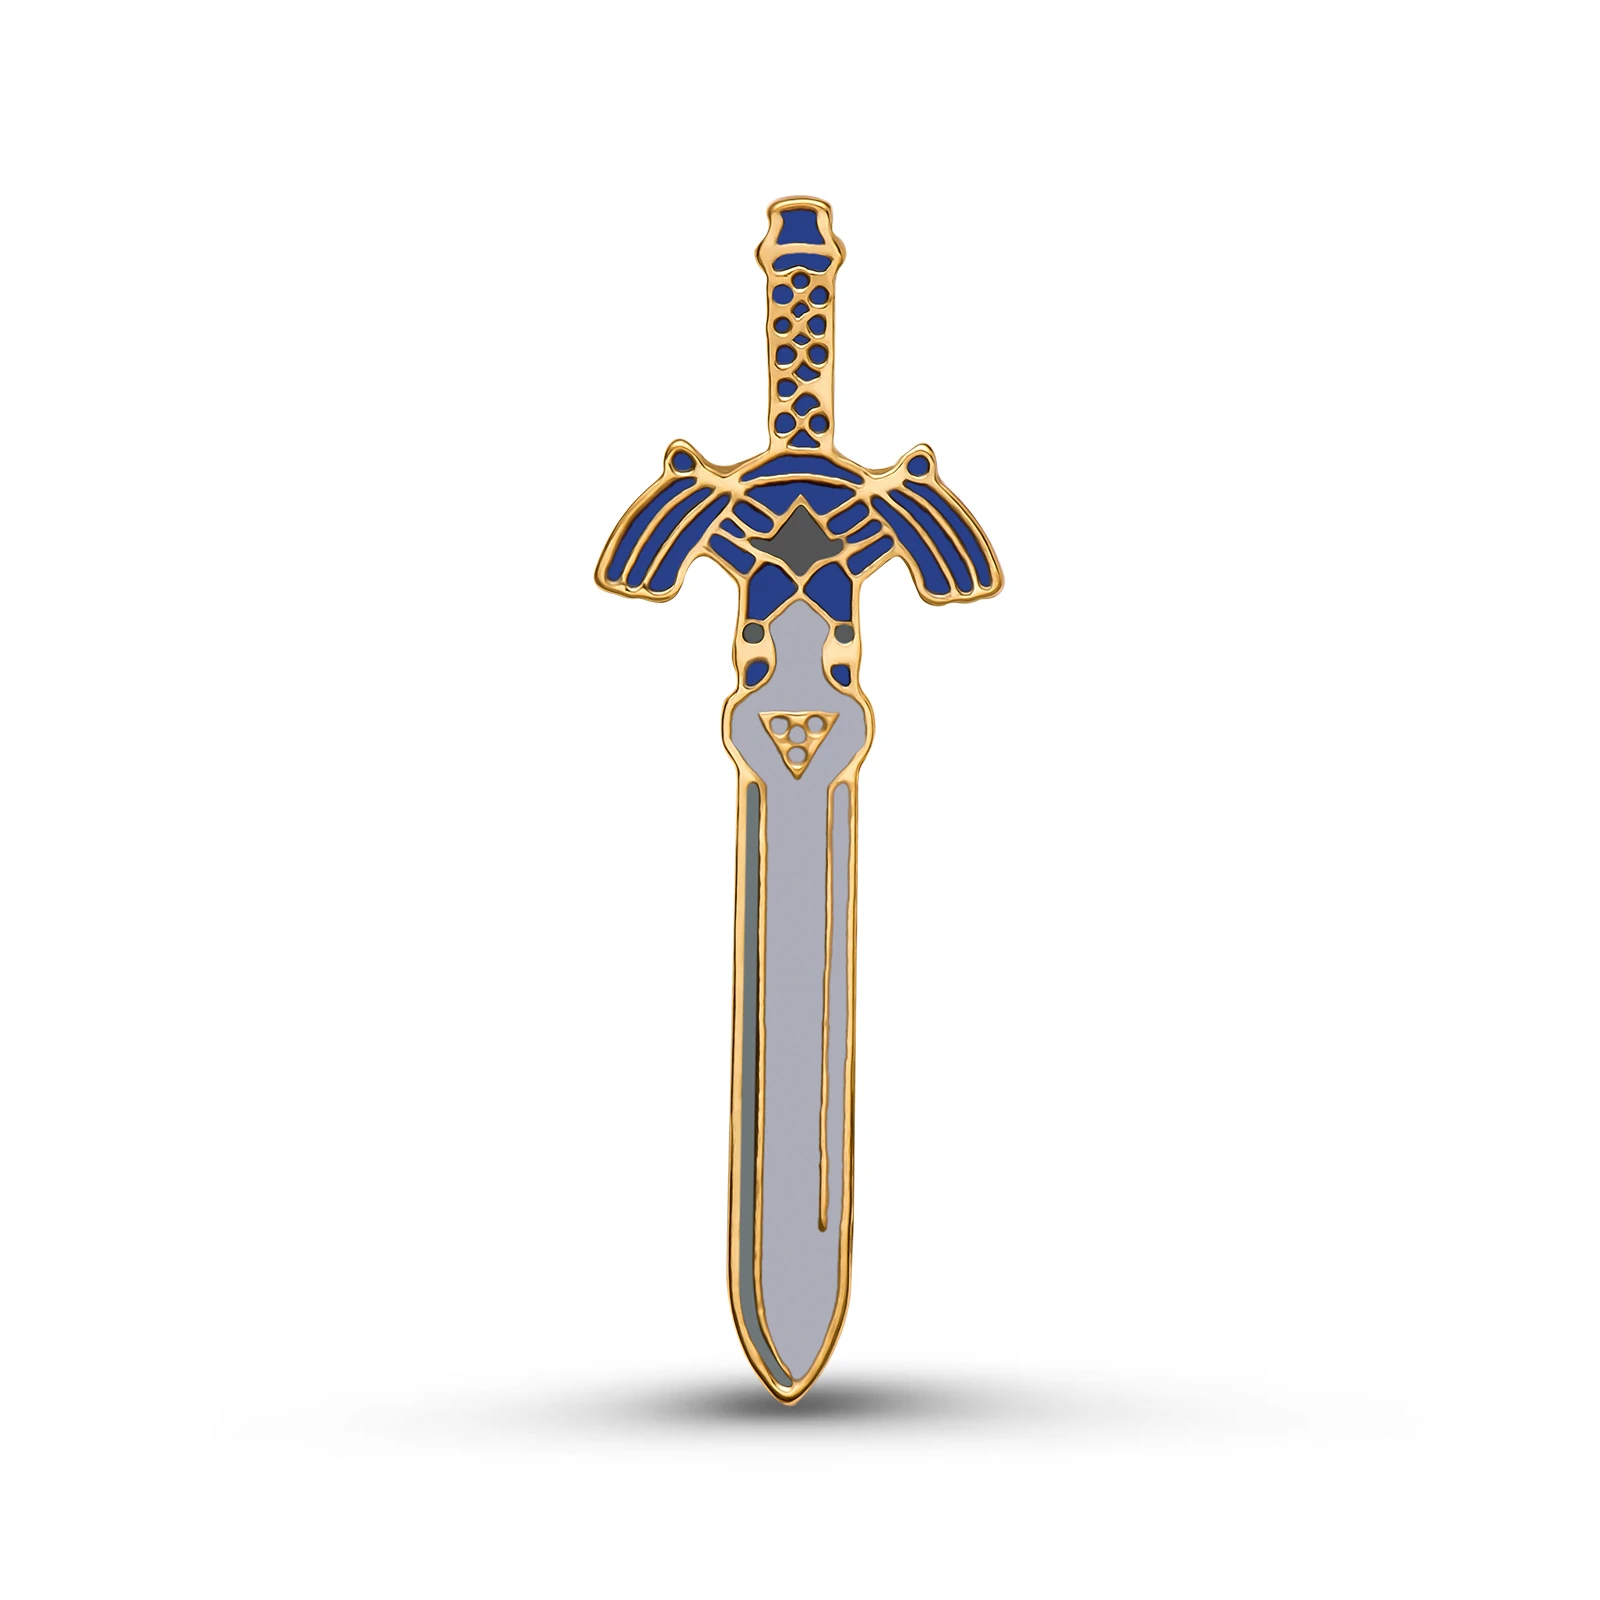 

The-Legend-Of -Zelda Enamel Pin Hot Sale Game Same Fashion Sword Brooch Backpack Hat Badge for Boyfriend Collect Jewelry Gift